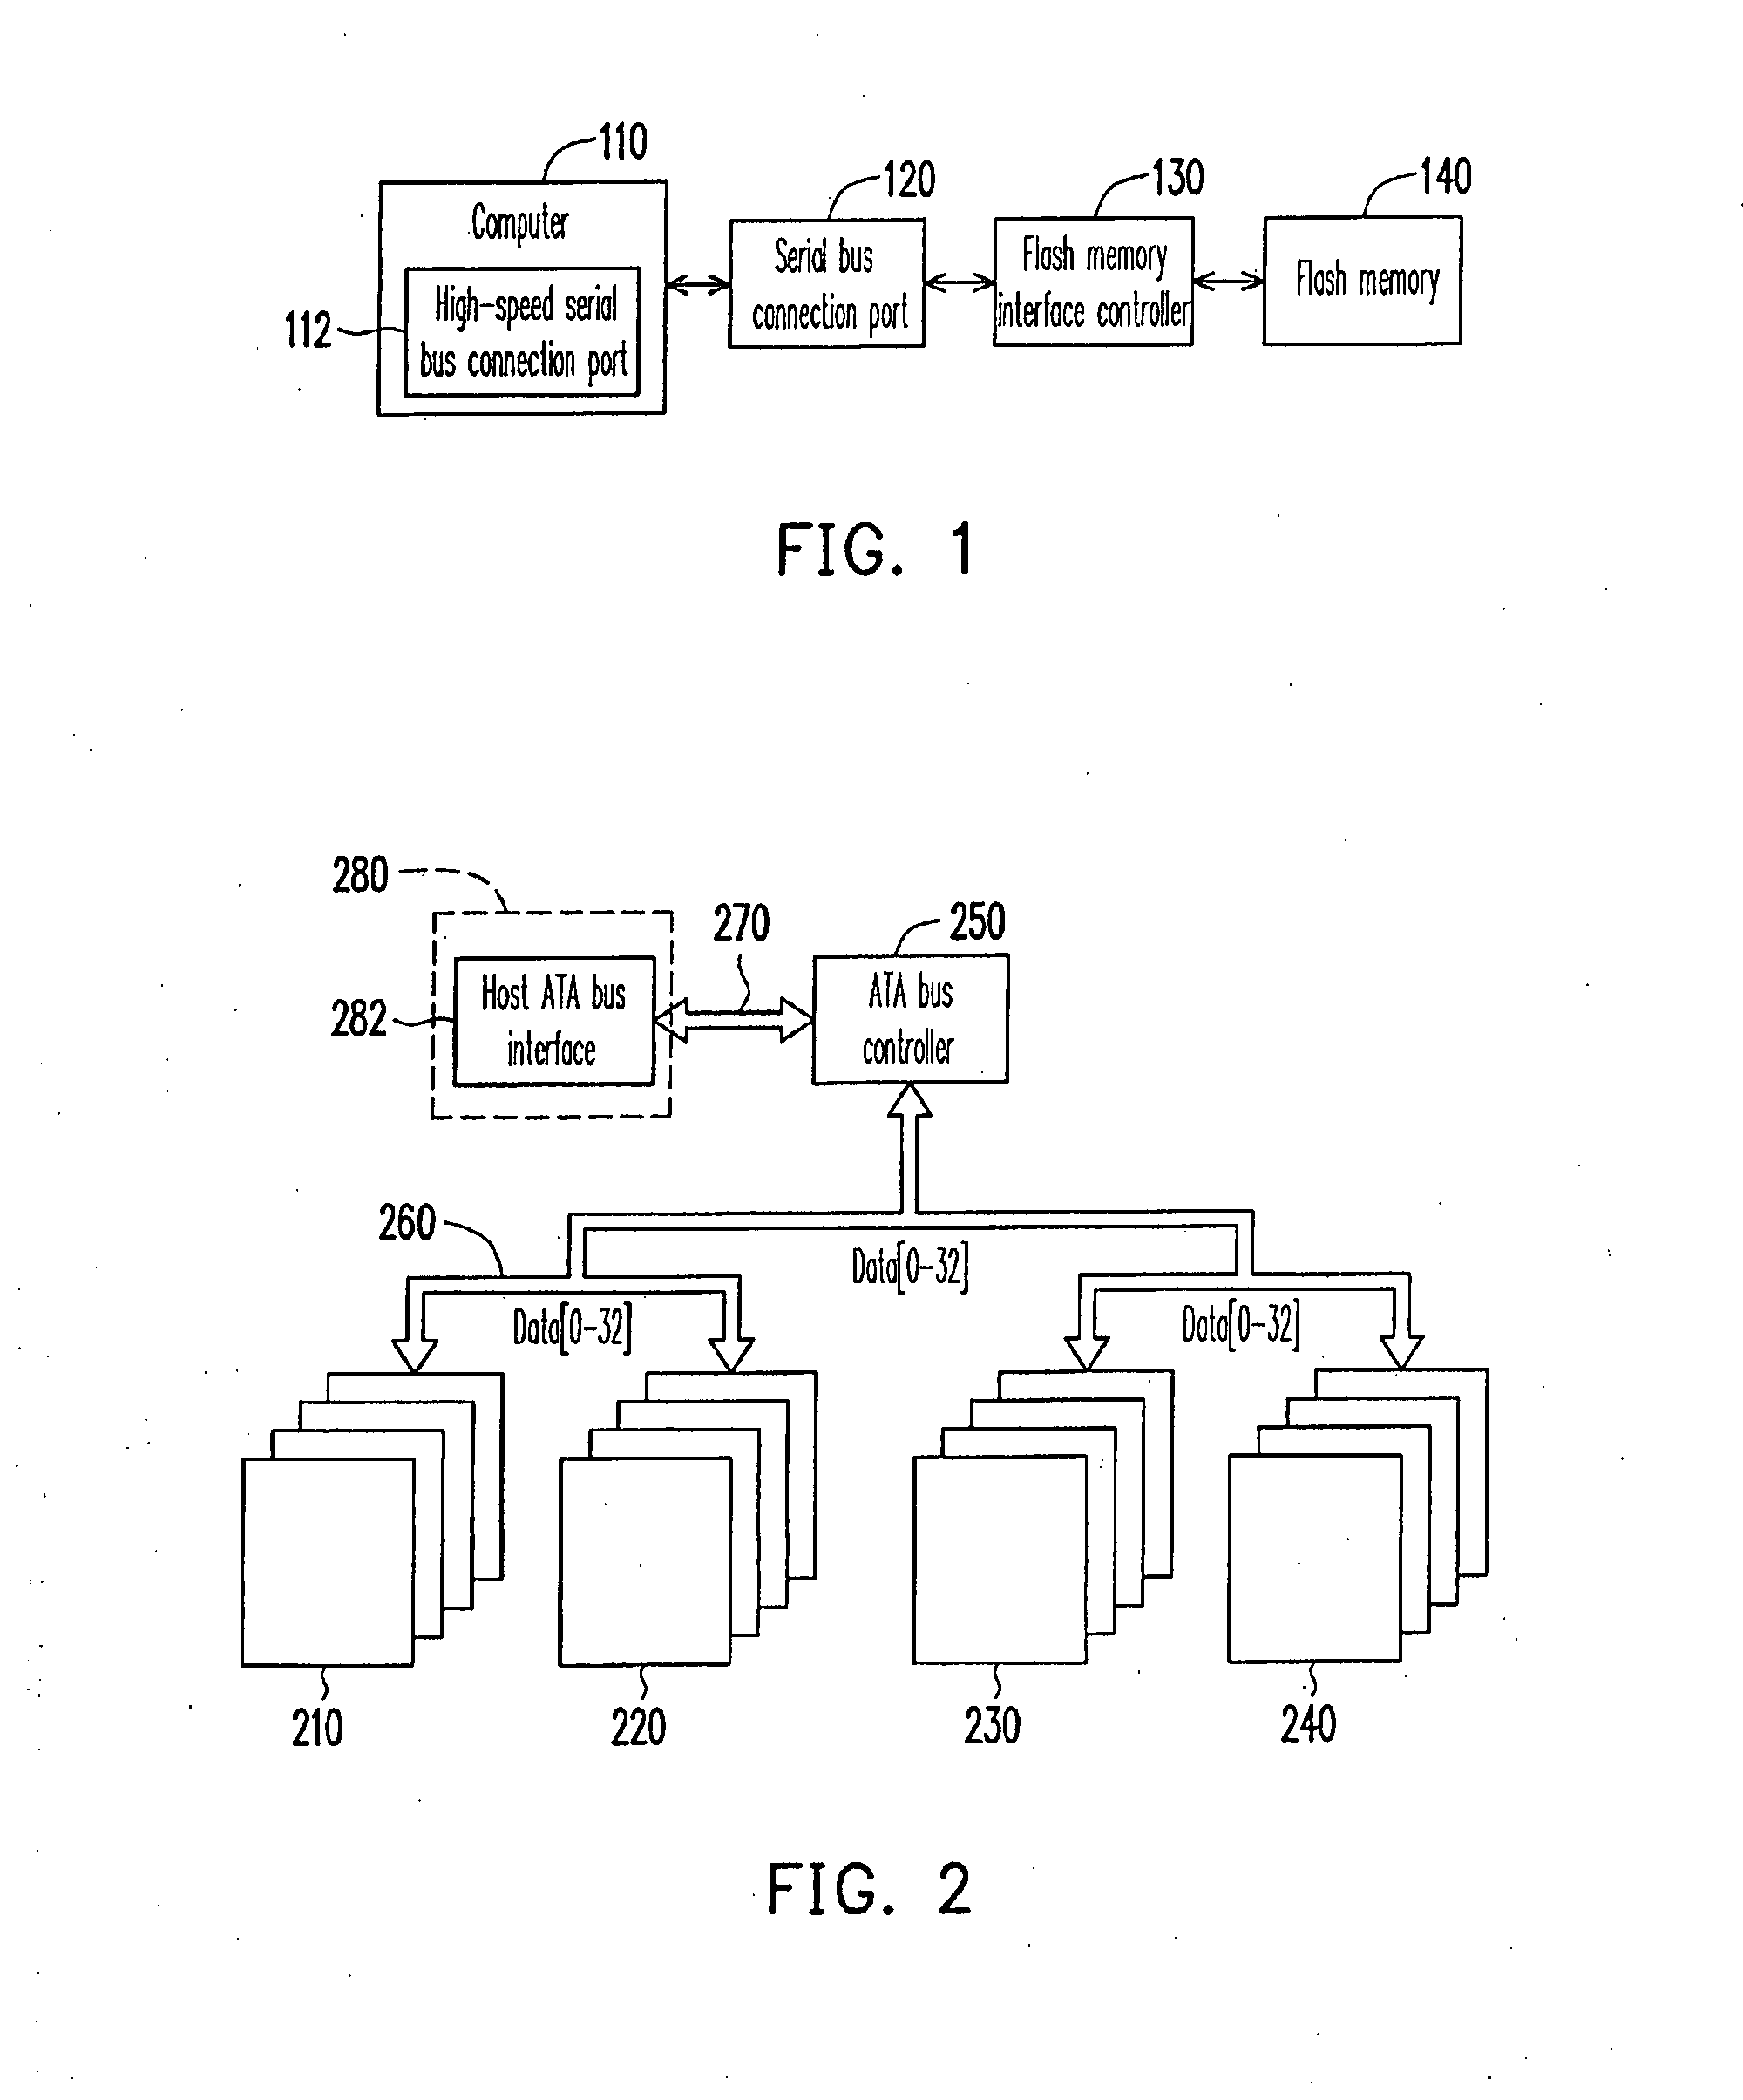 Solid state disk storage system with parallel accesssing architecture and solid state disck controller